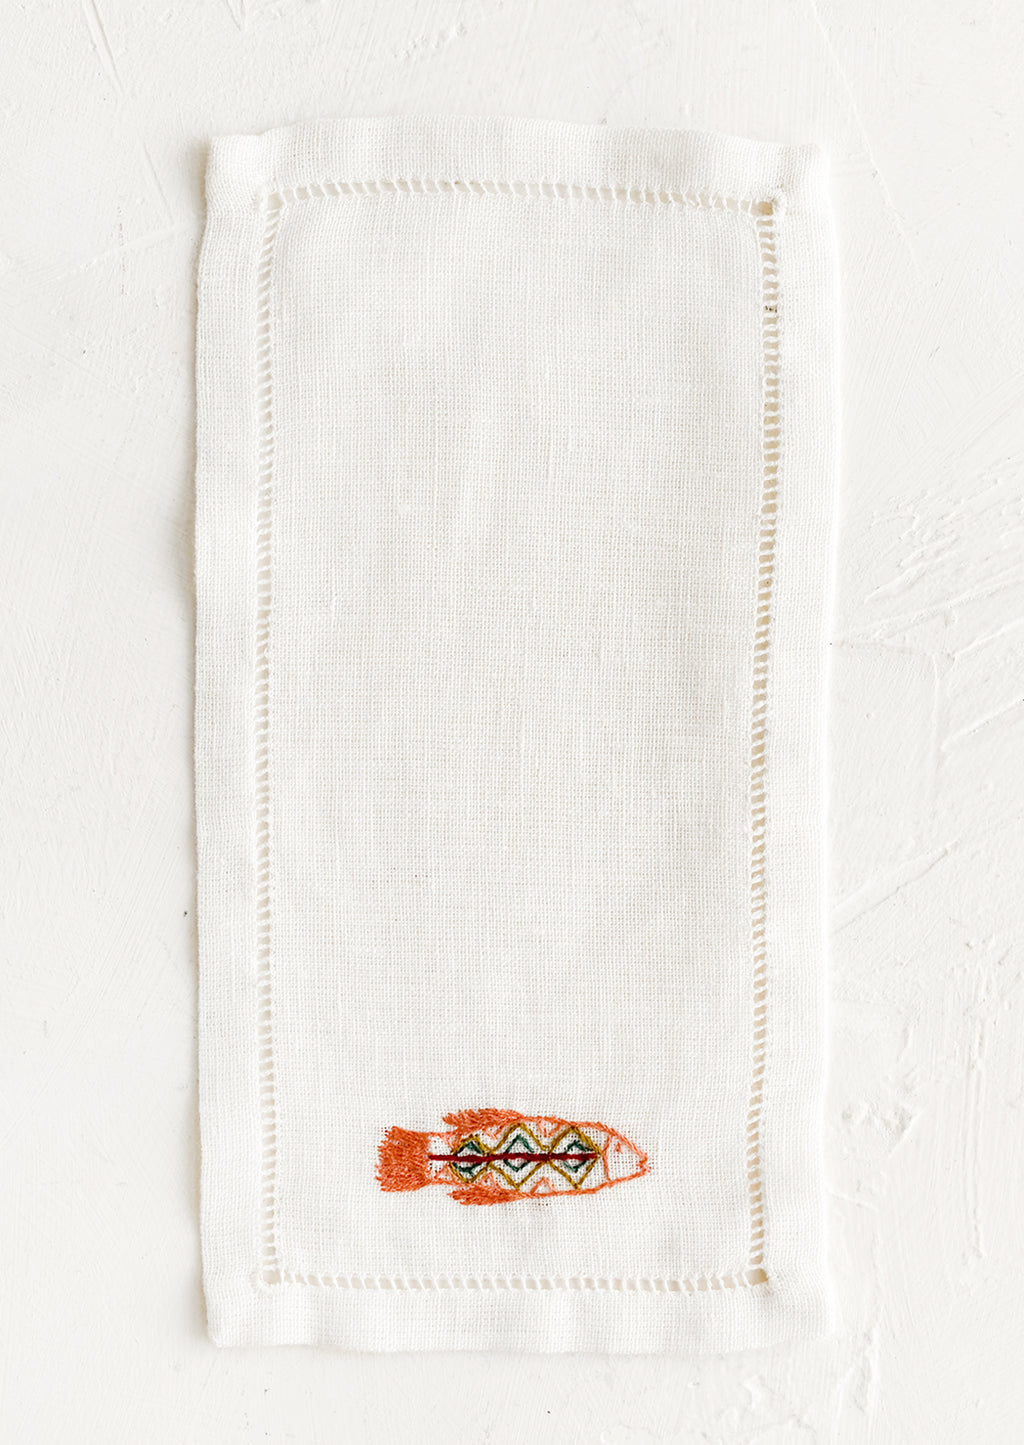 1: An white linen cocktail napkin with embroidered fish.